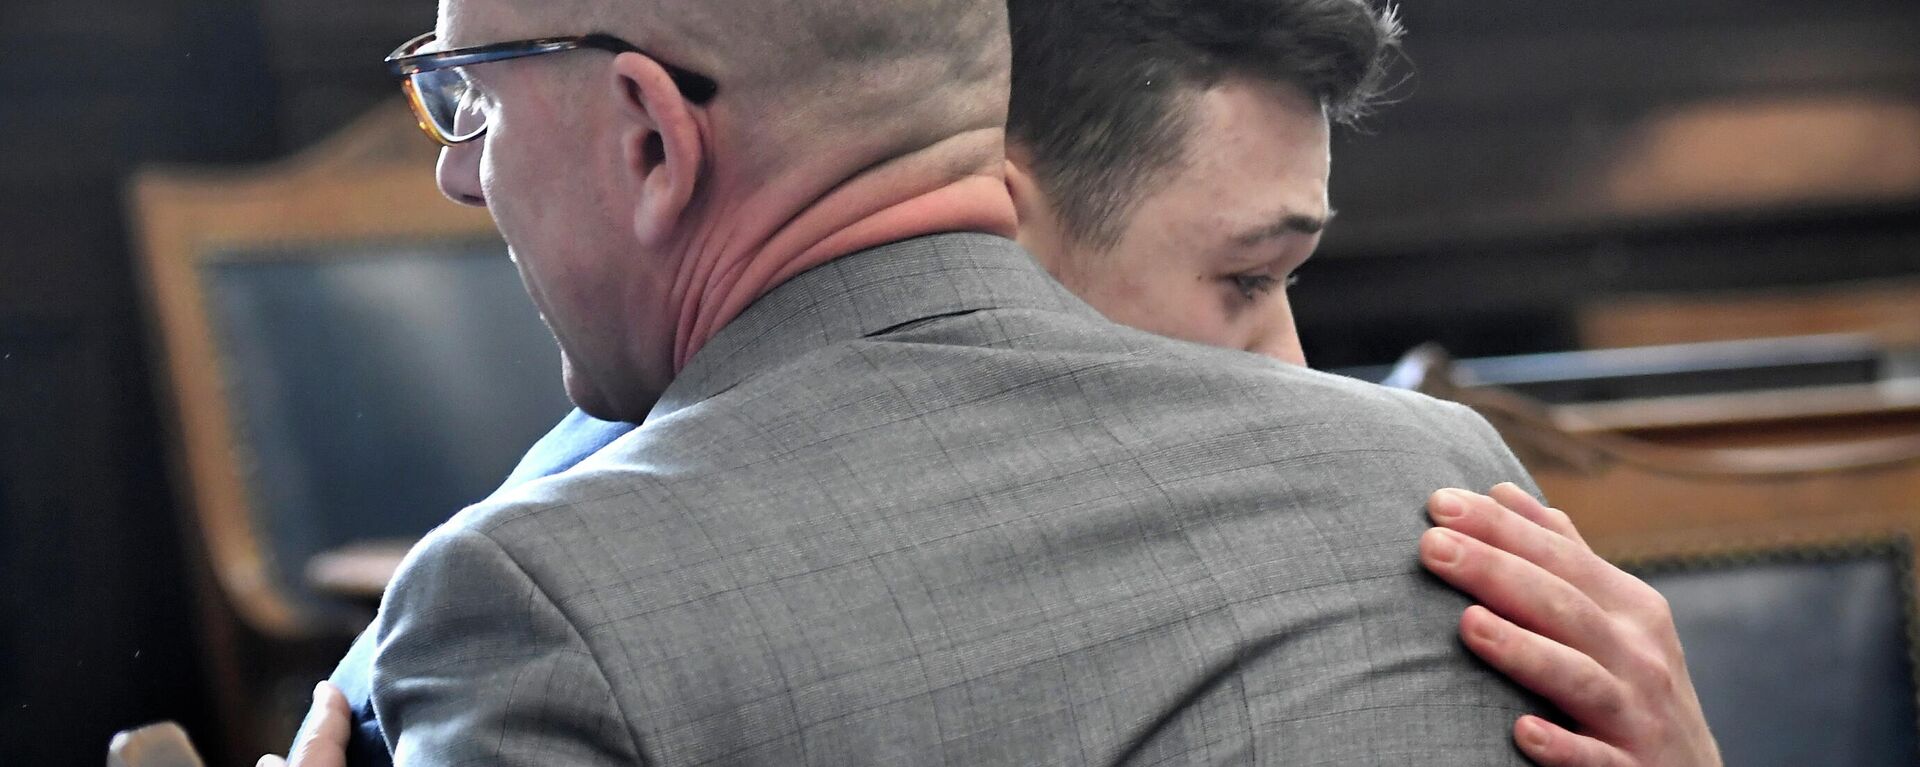 Kyle Rittenhouse hugs one of his attorneys Corey Chirafisi as he reacts to the verdict during his trial at the Kenosha County Courthouse in Kenosha, Wisconsin, U.S., November 19, 2021 - Sputnik International, 1920, 19.11.2021